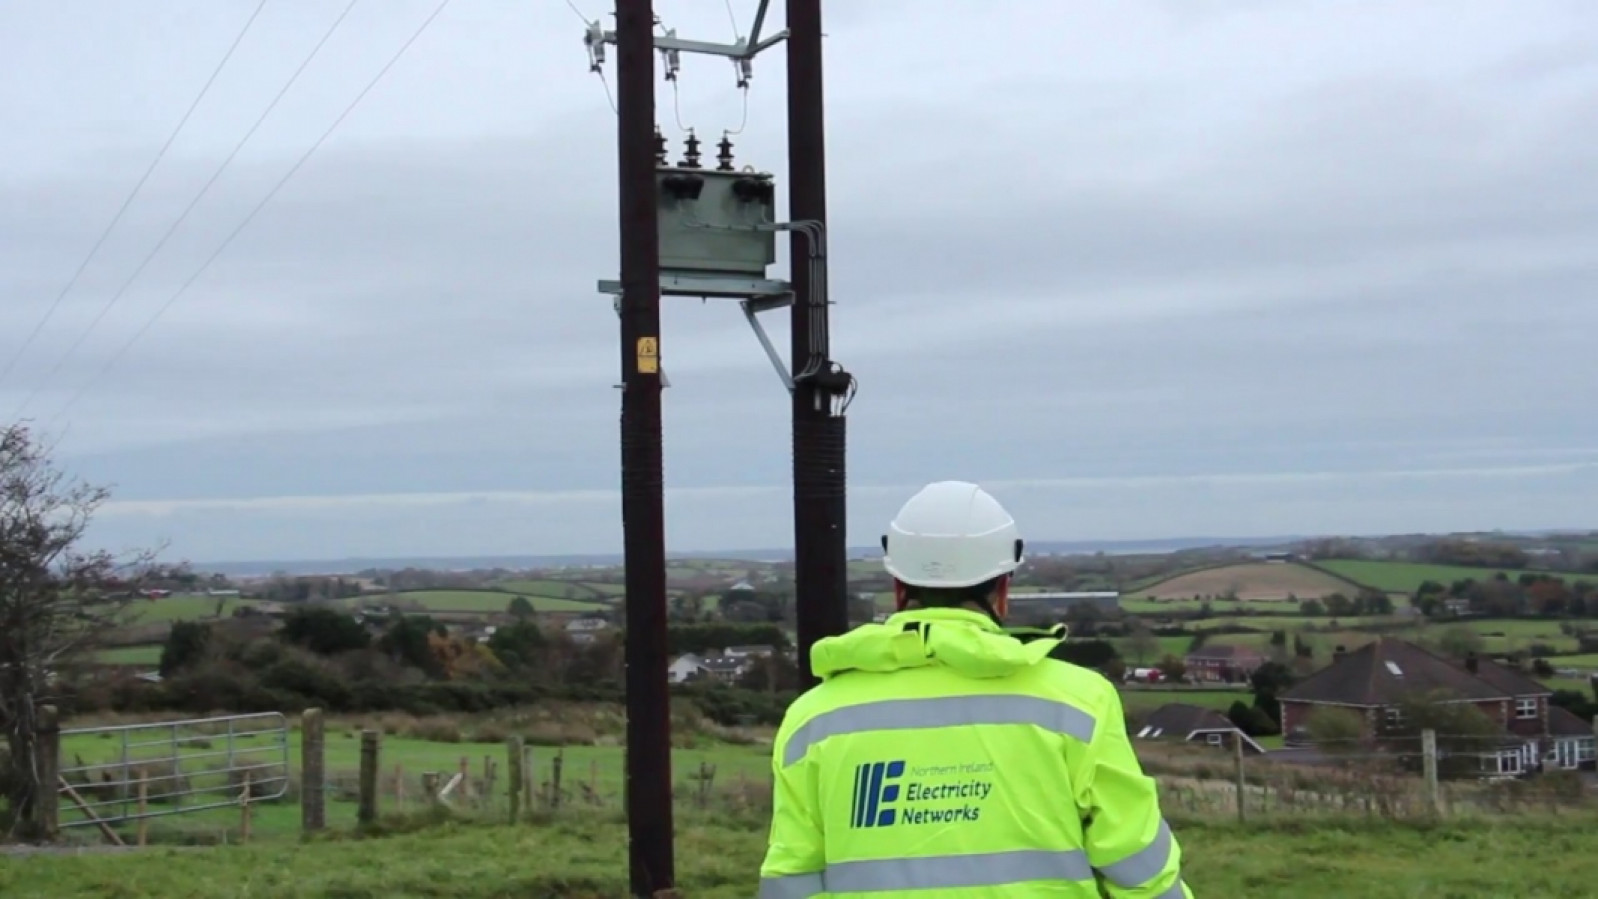 Winder Power Secures £9m NIE Networks Contract